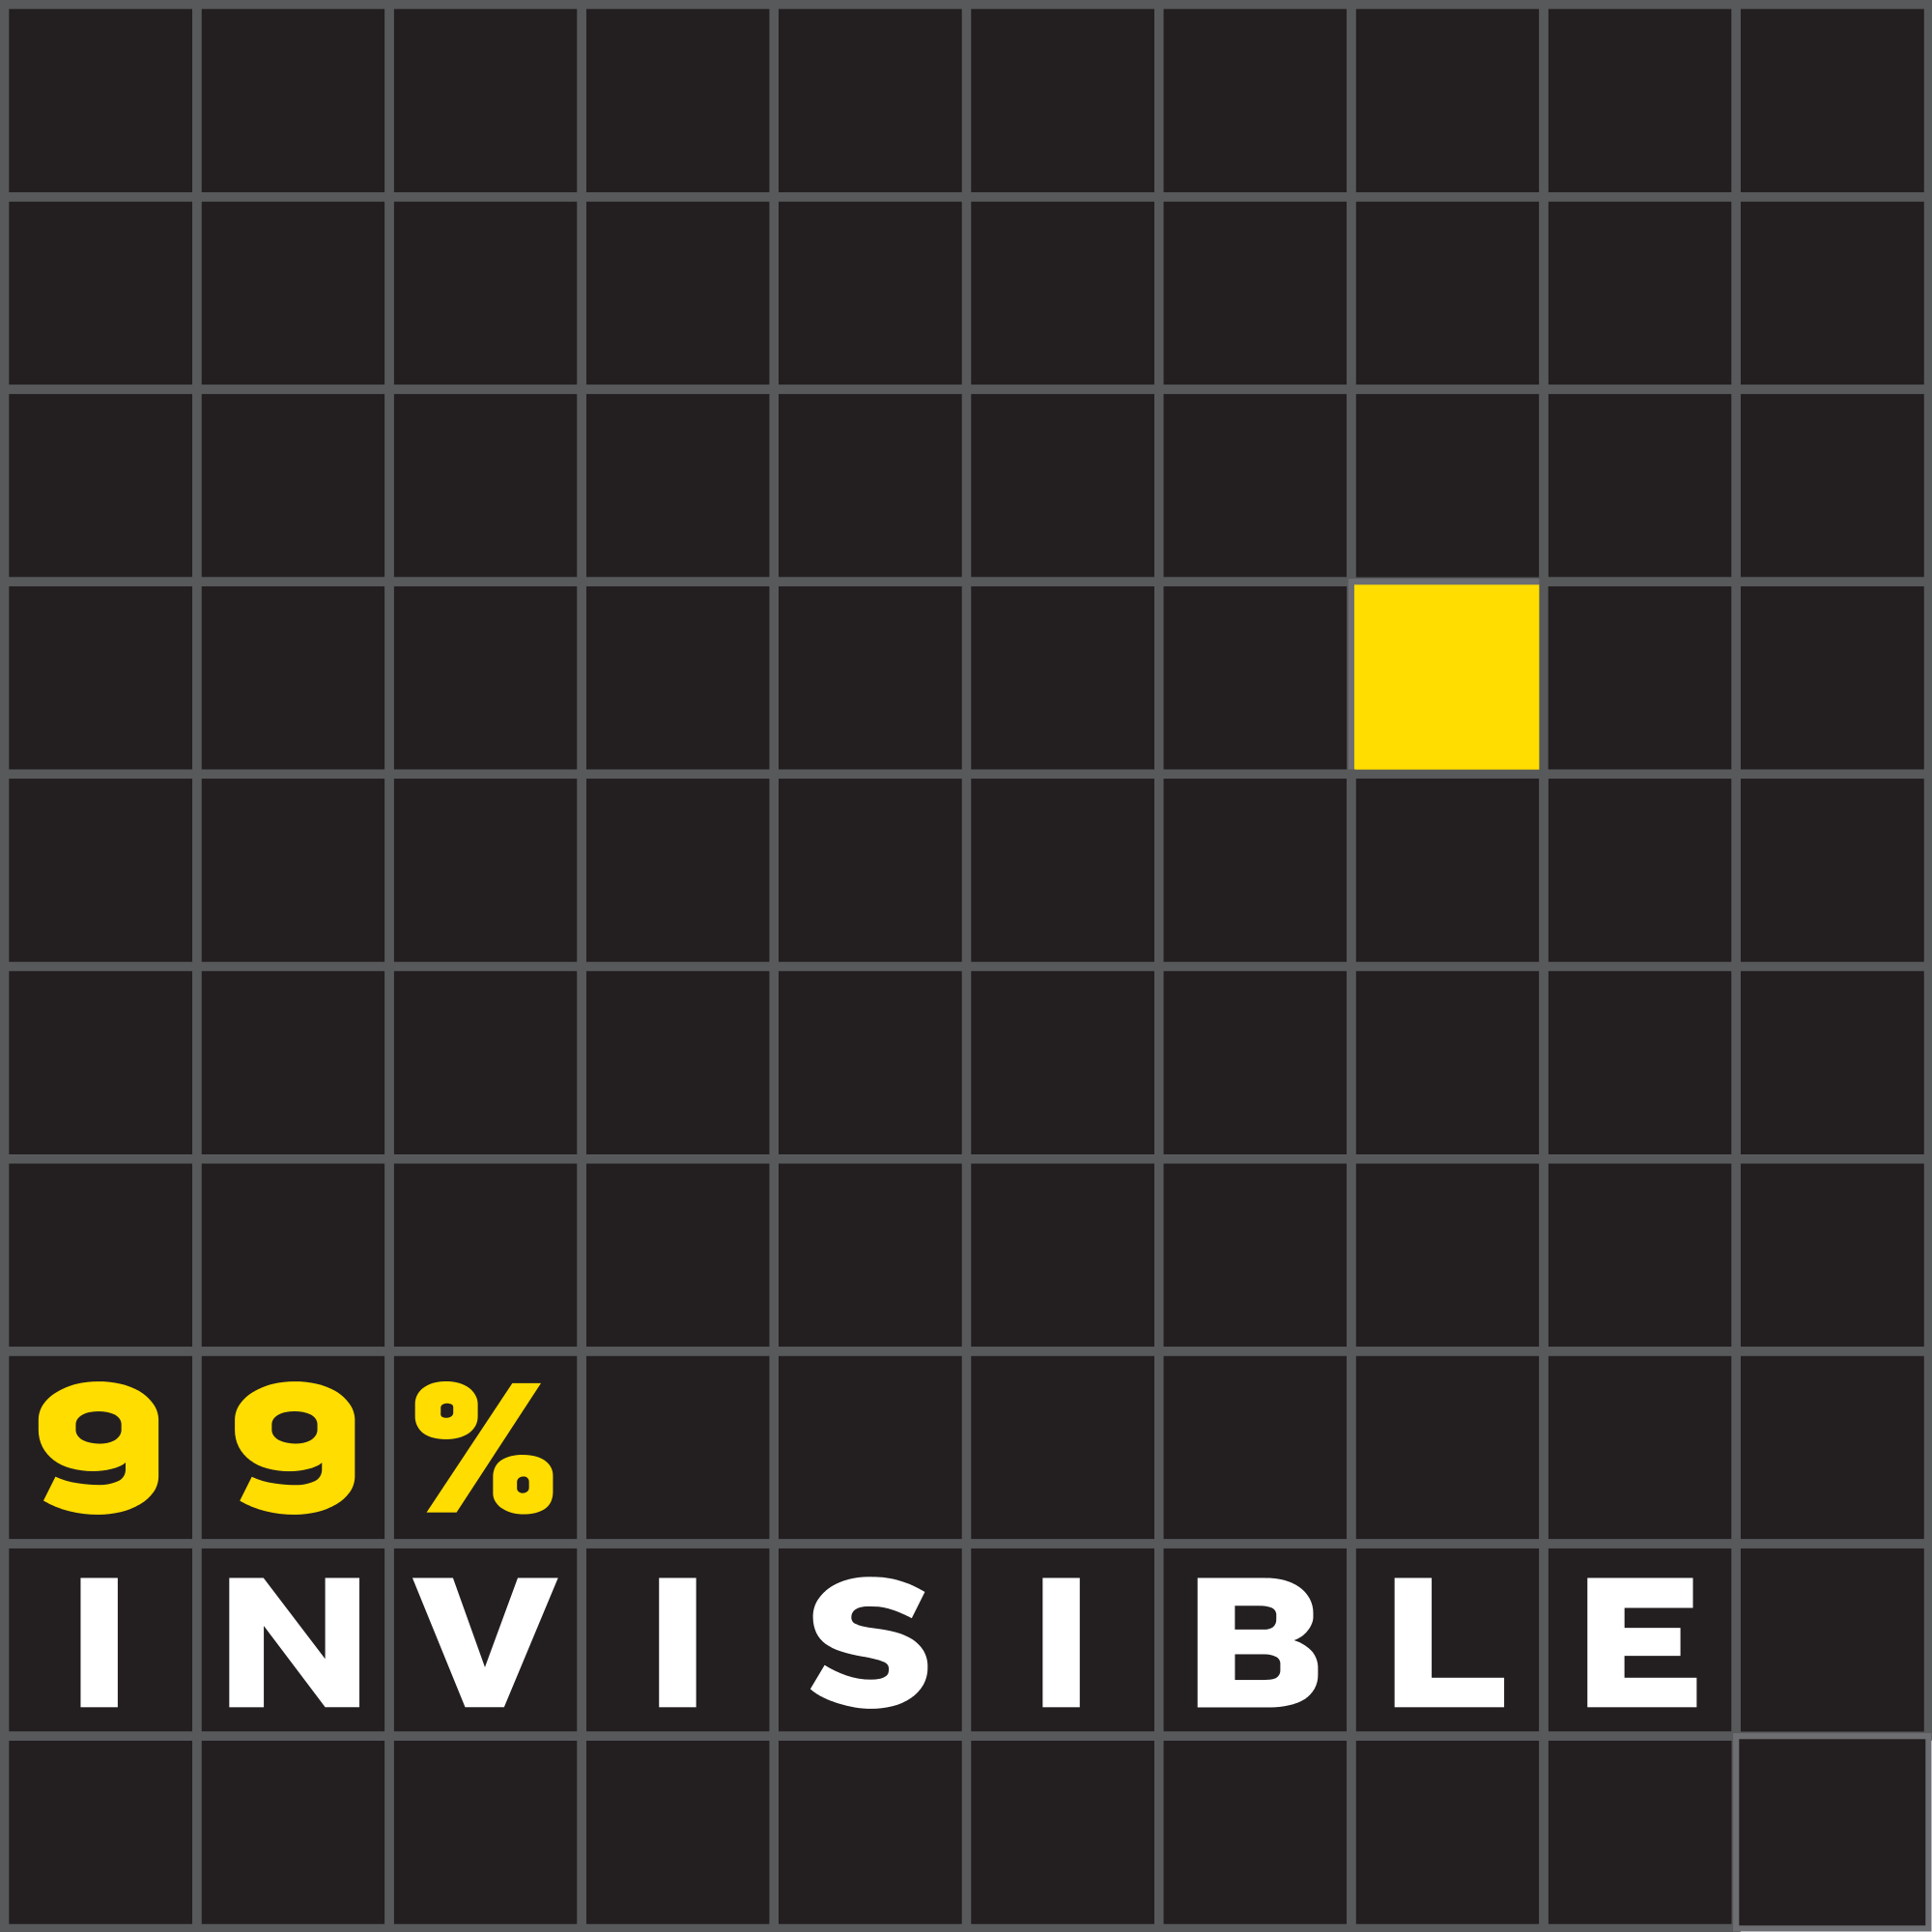 99% Invisible podcast show logo